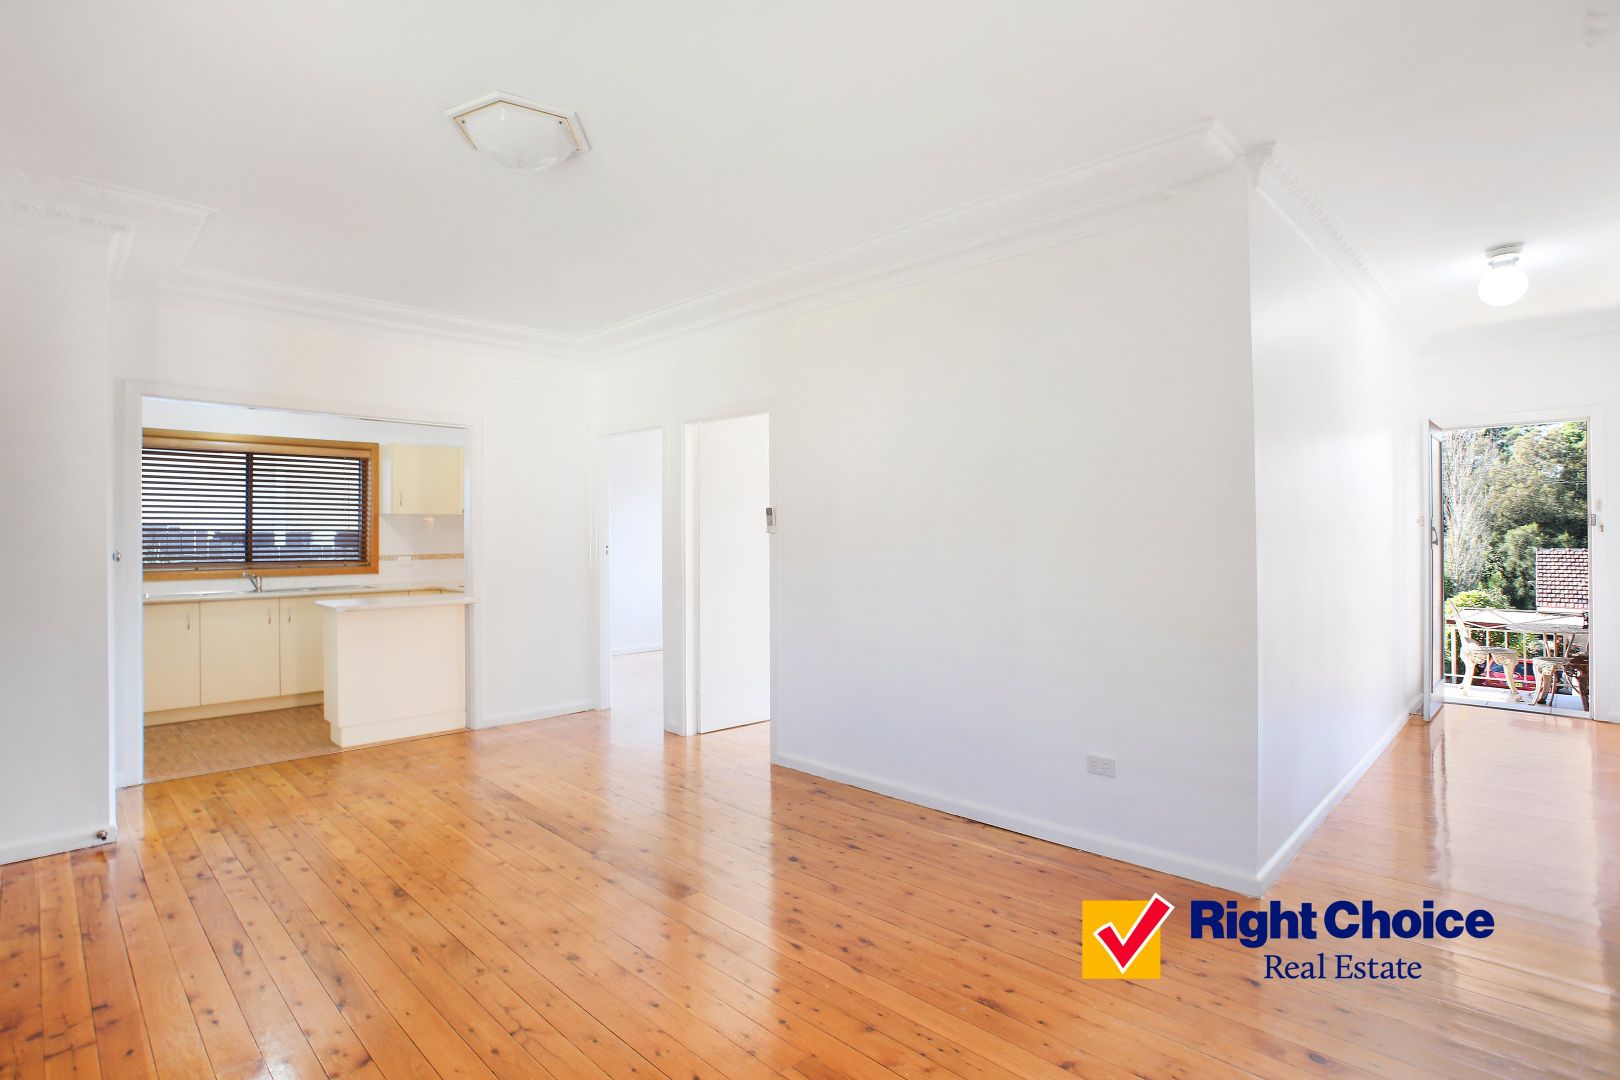 4 bedroom house bought by Heims, Buyers Agent in Wollongong 